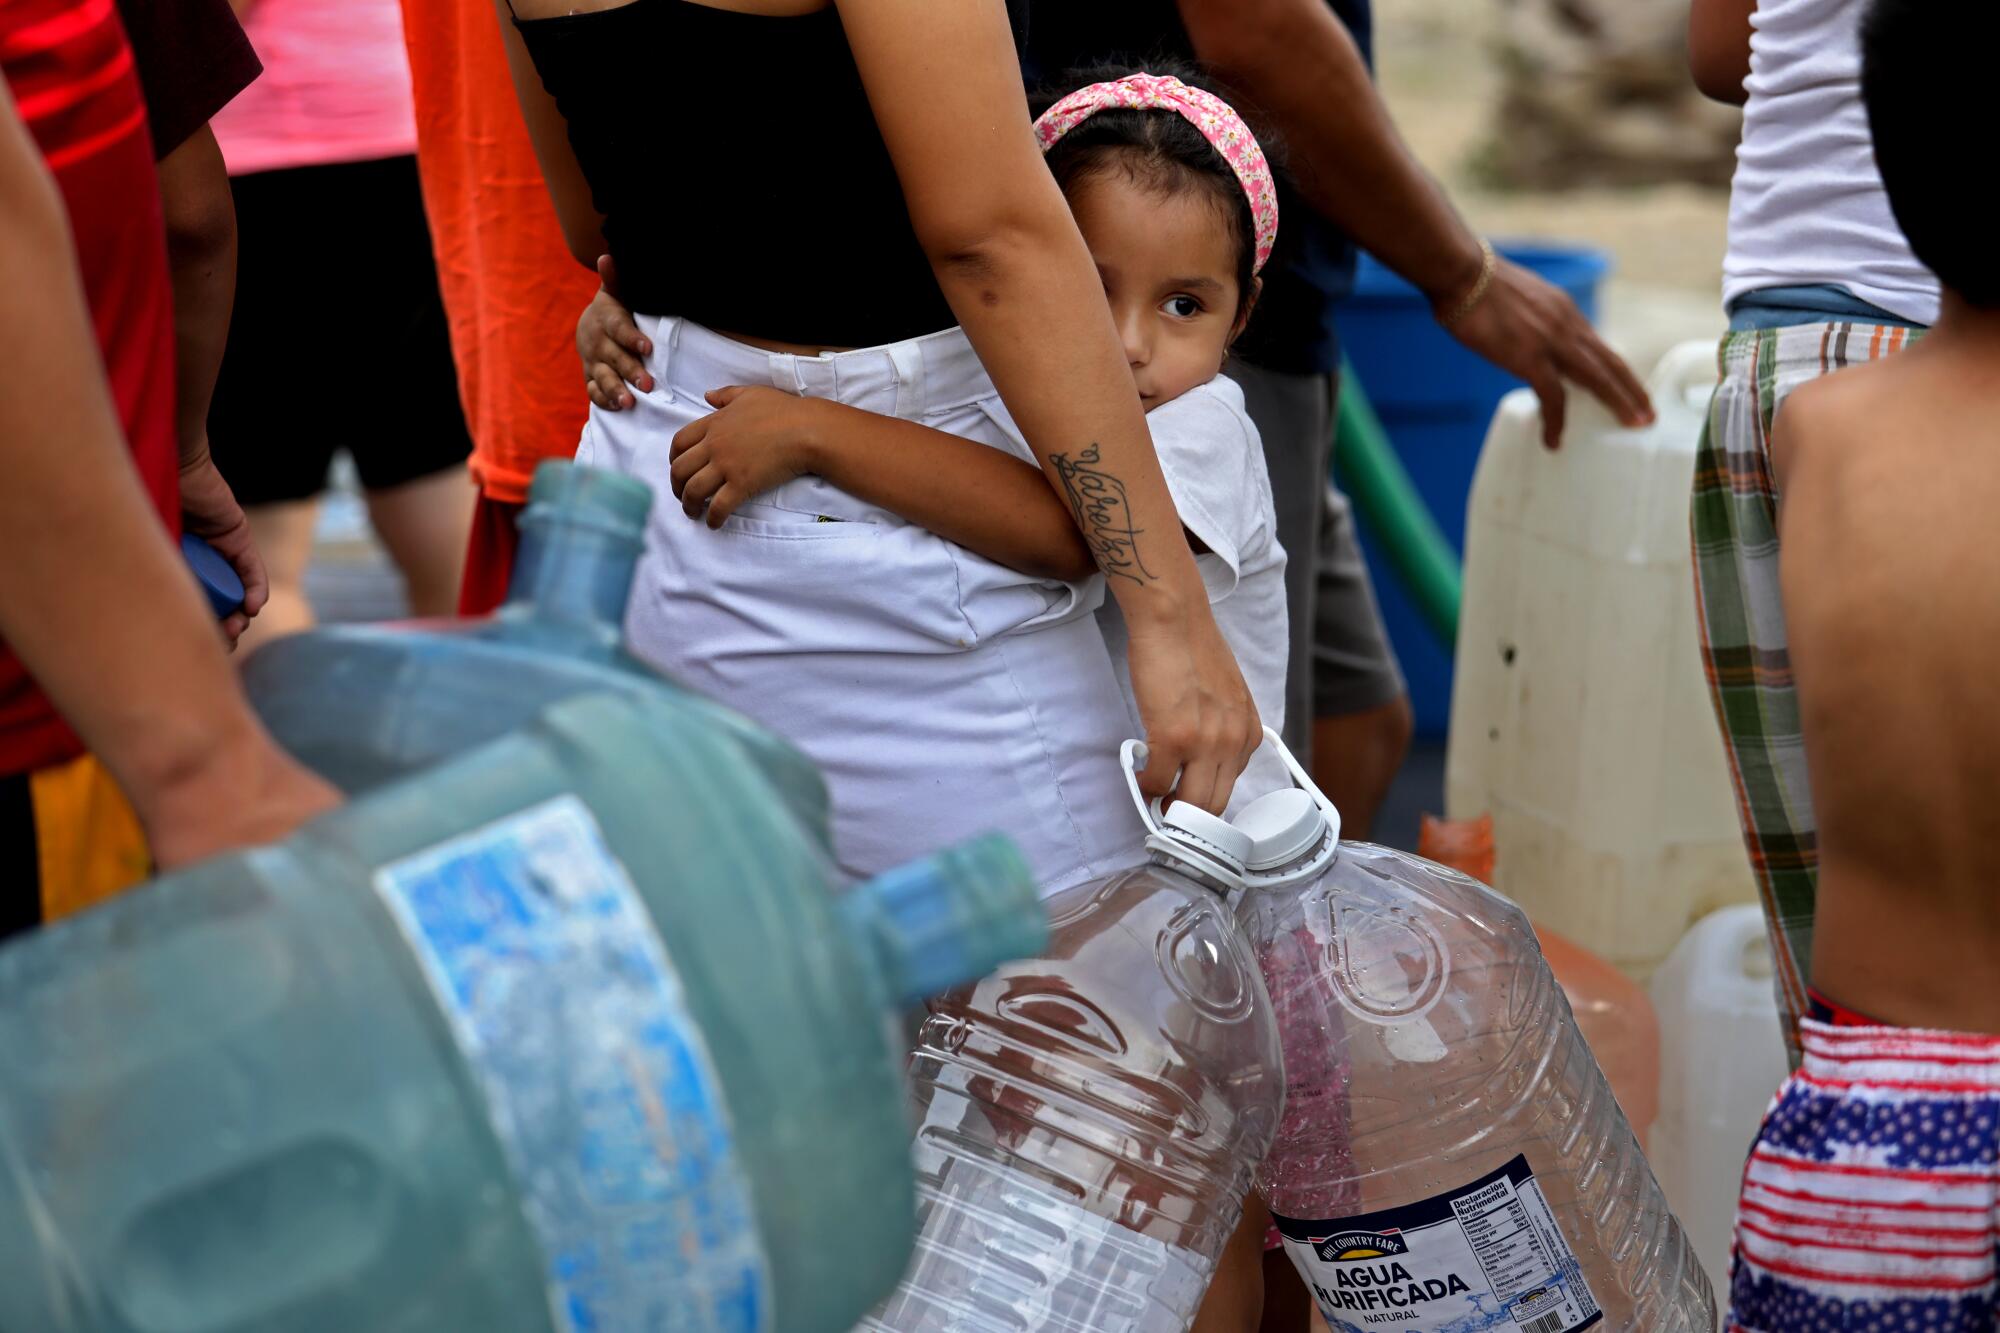 A young girl waits in line for non-potable water